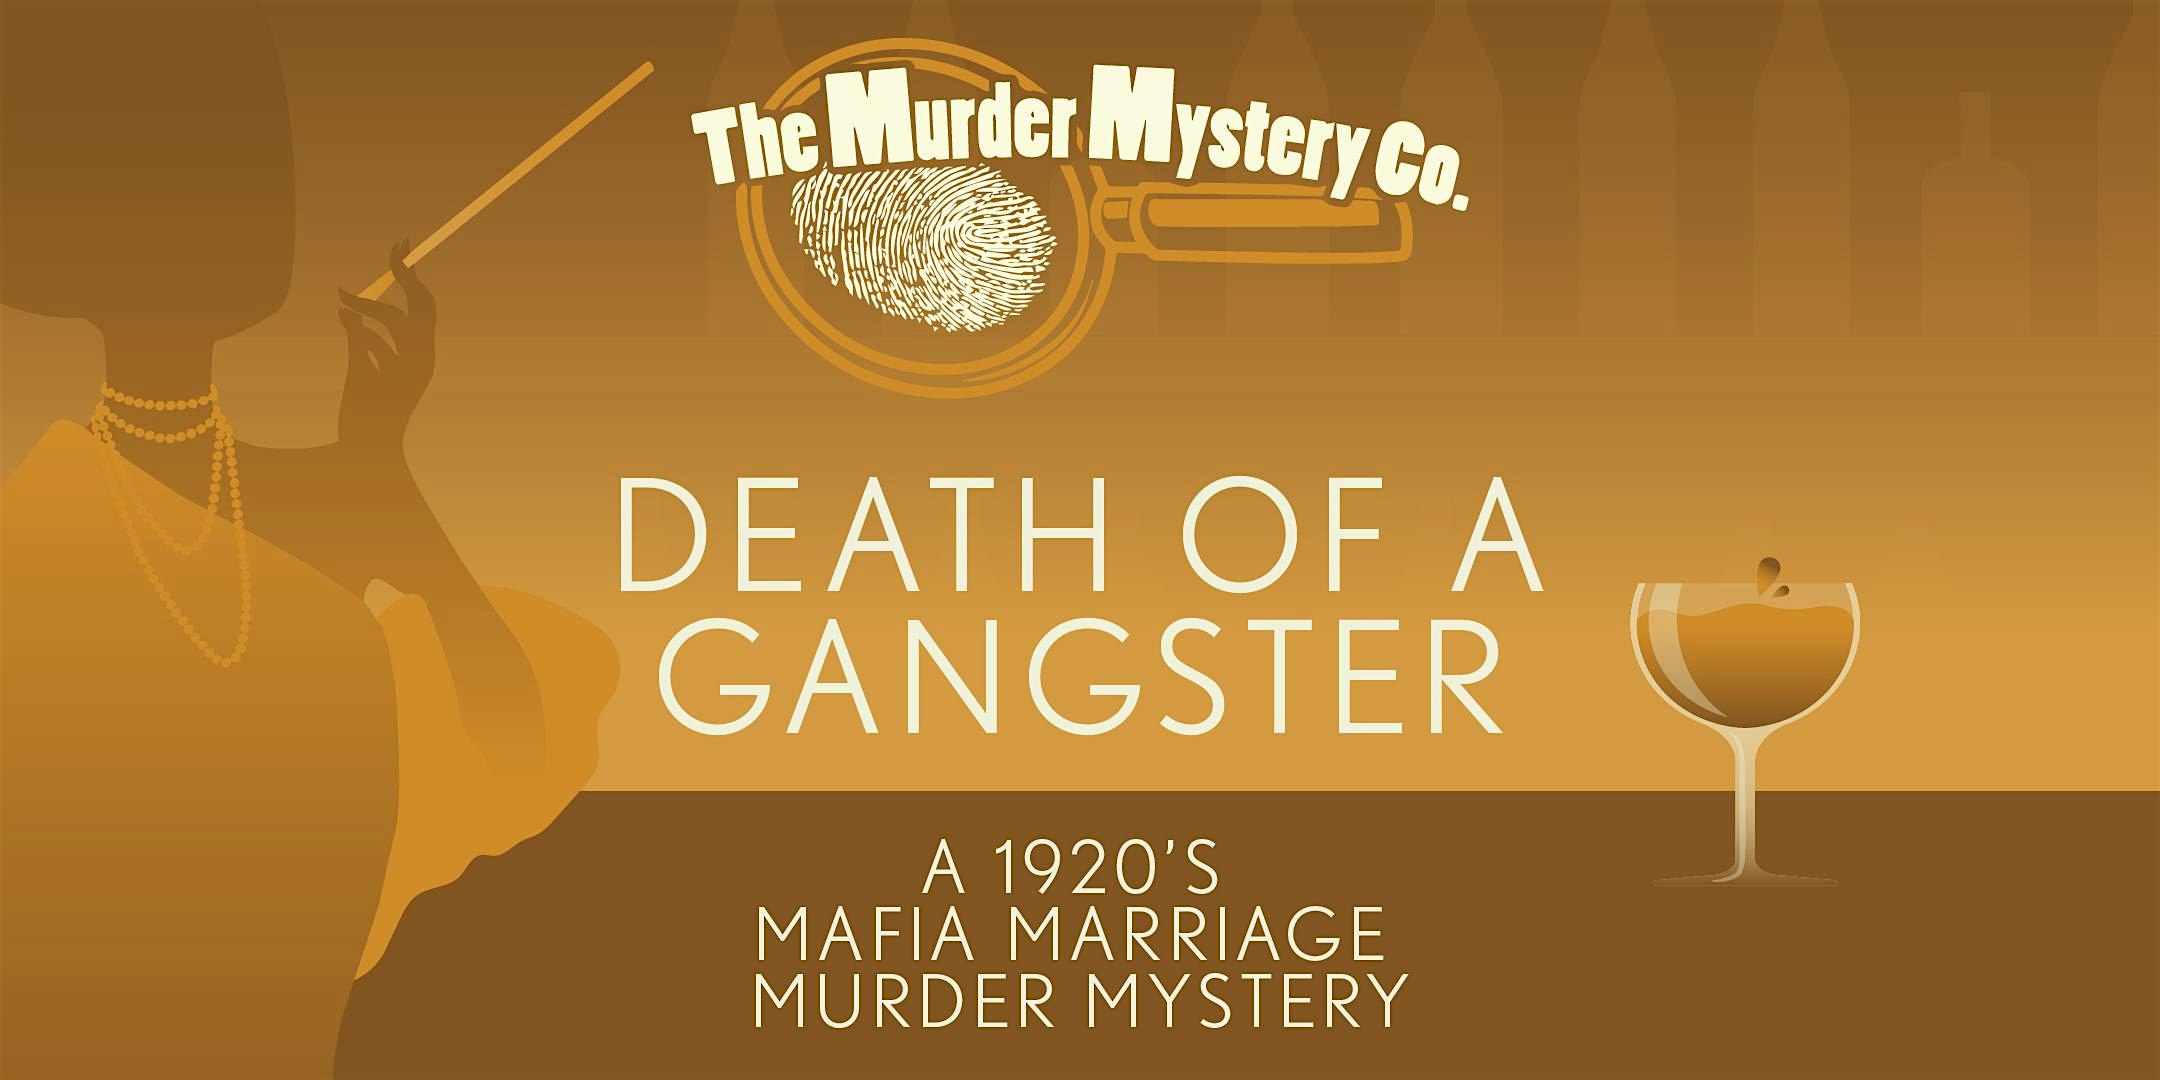 Murder Mystery Dinner Theater Show in Boston: Death of a Gangster